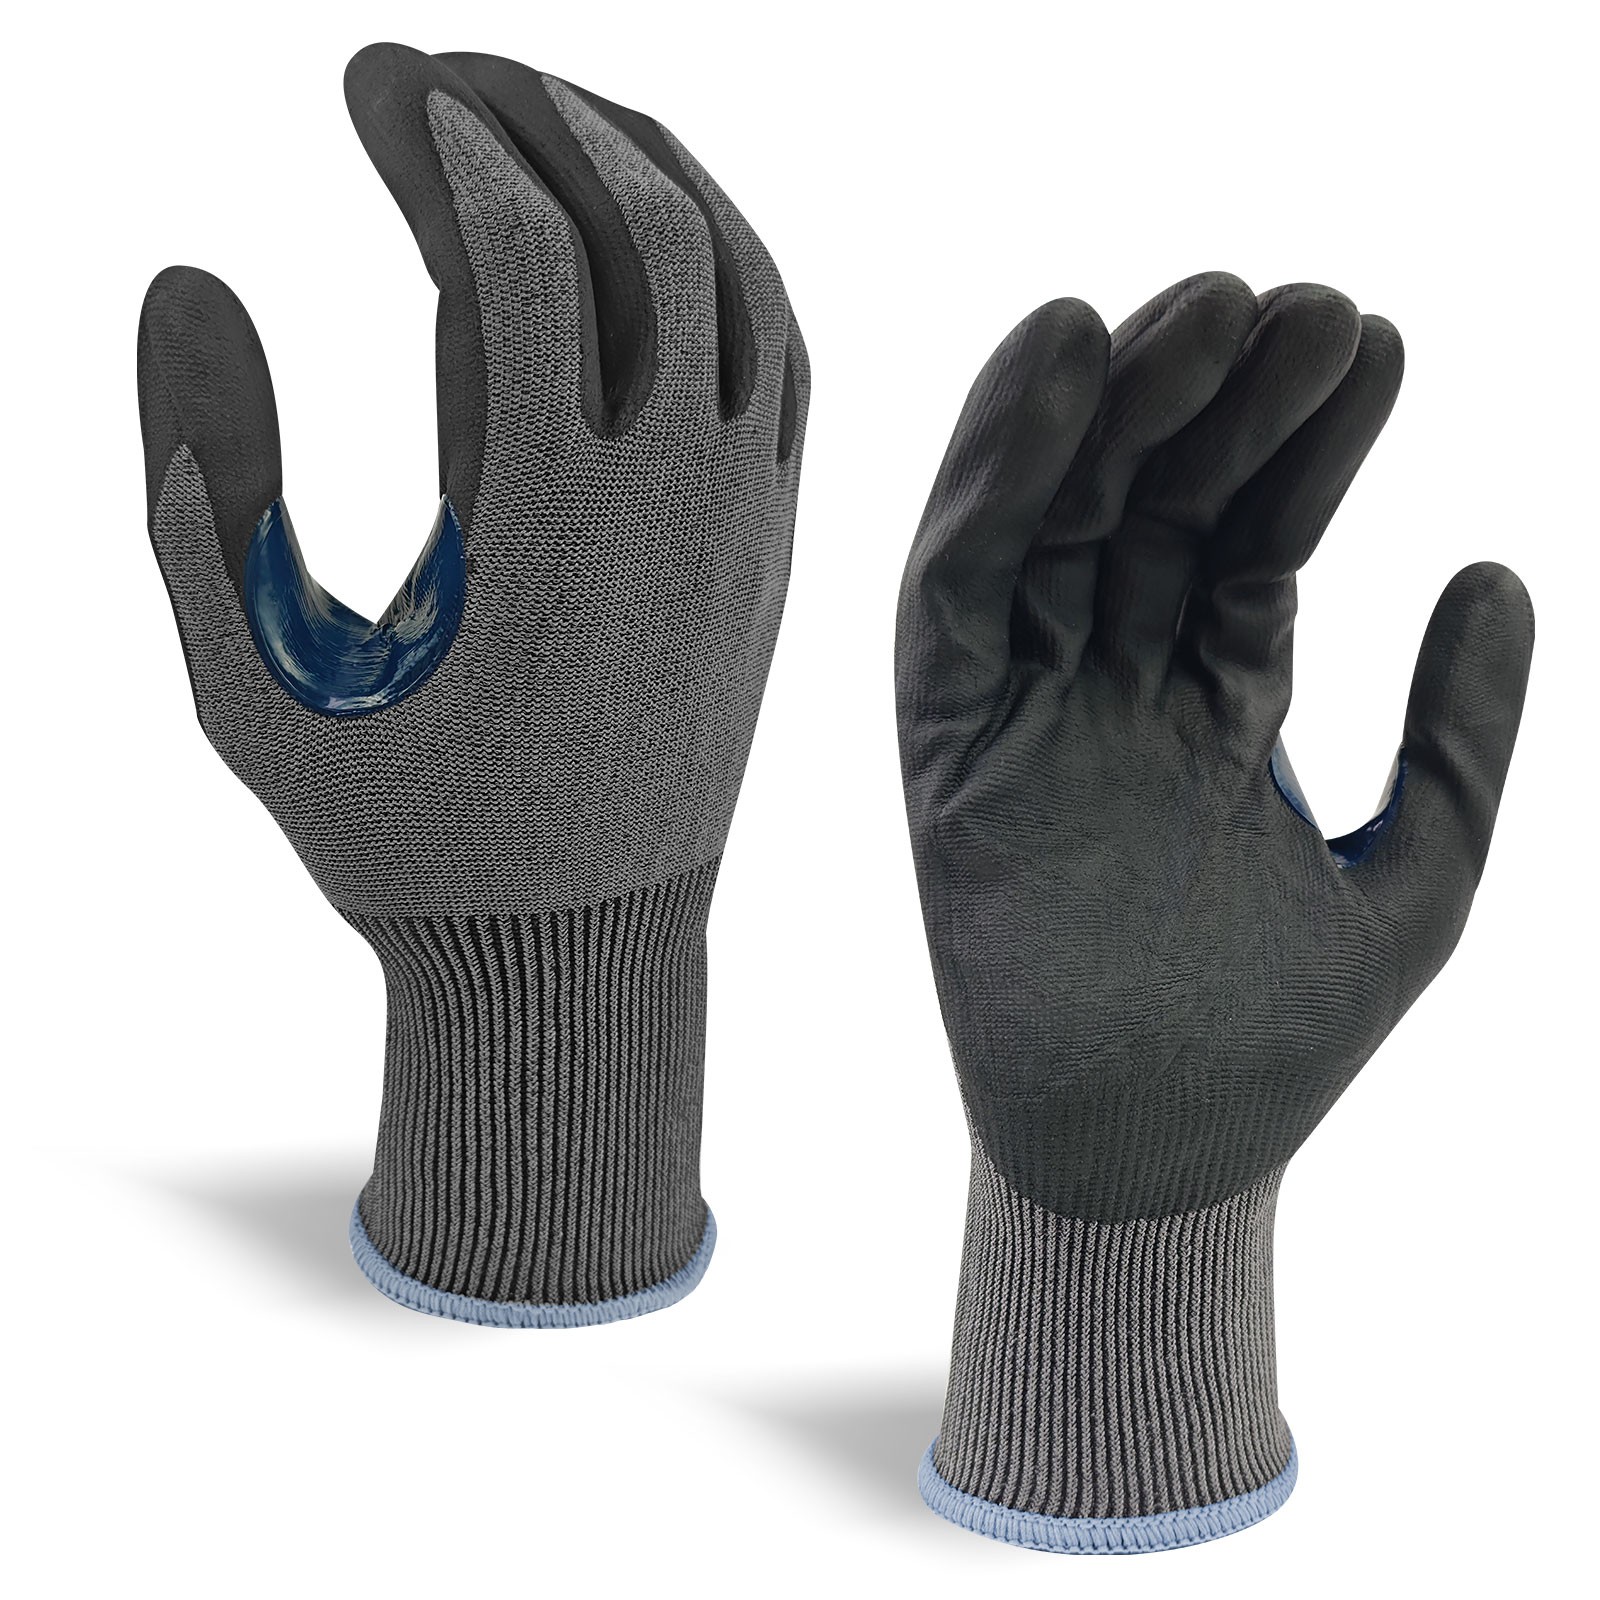 18G Nitrile Dipped Touch Screen A6 Cut Resistant Glove with Thumb Crotch Reinforced/60812